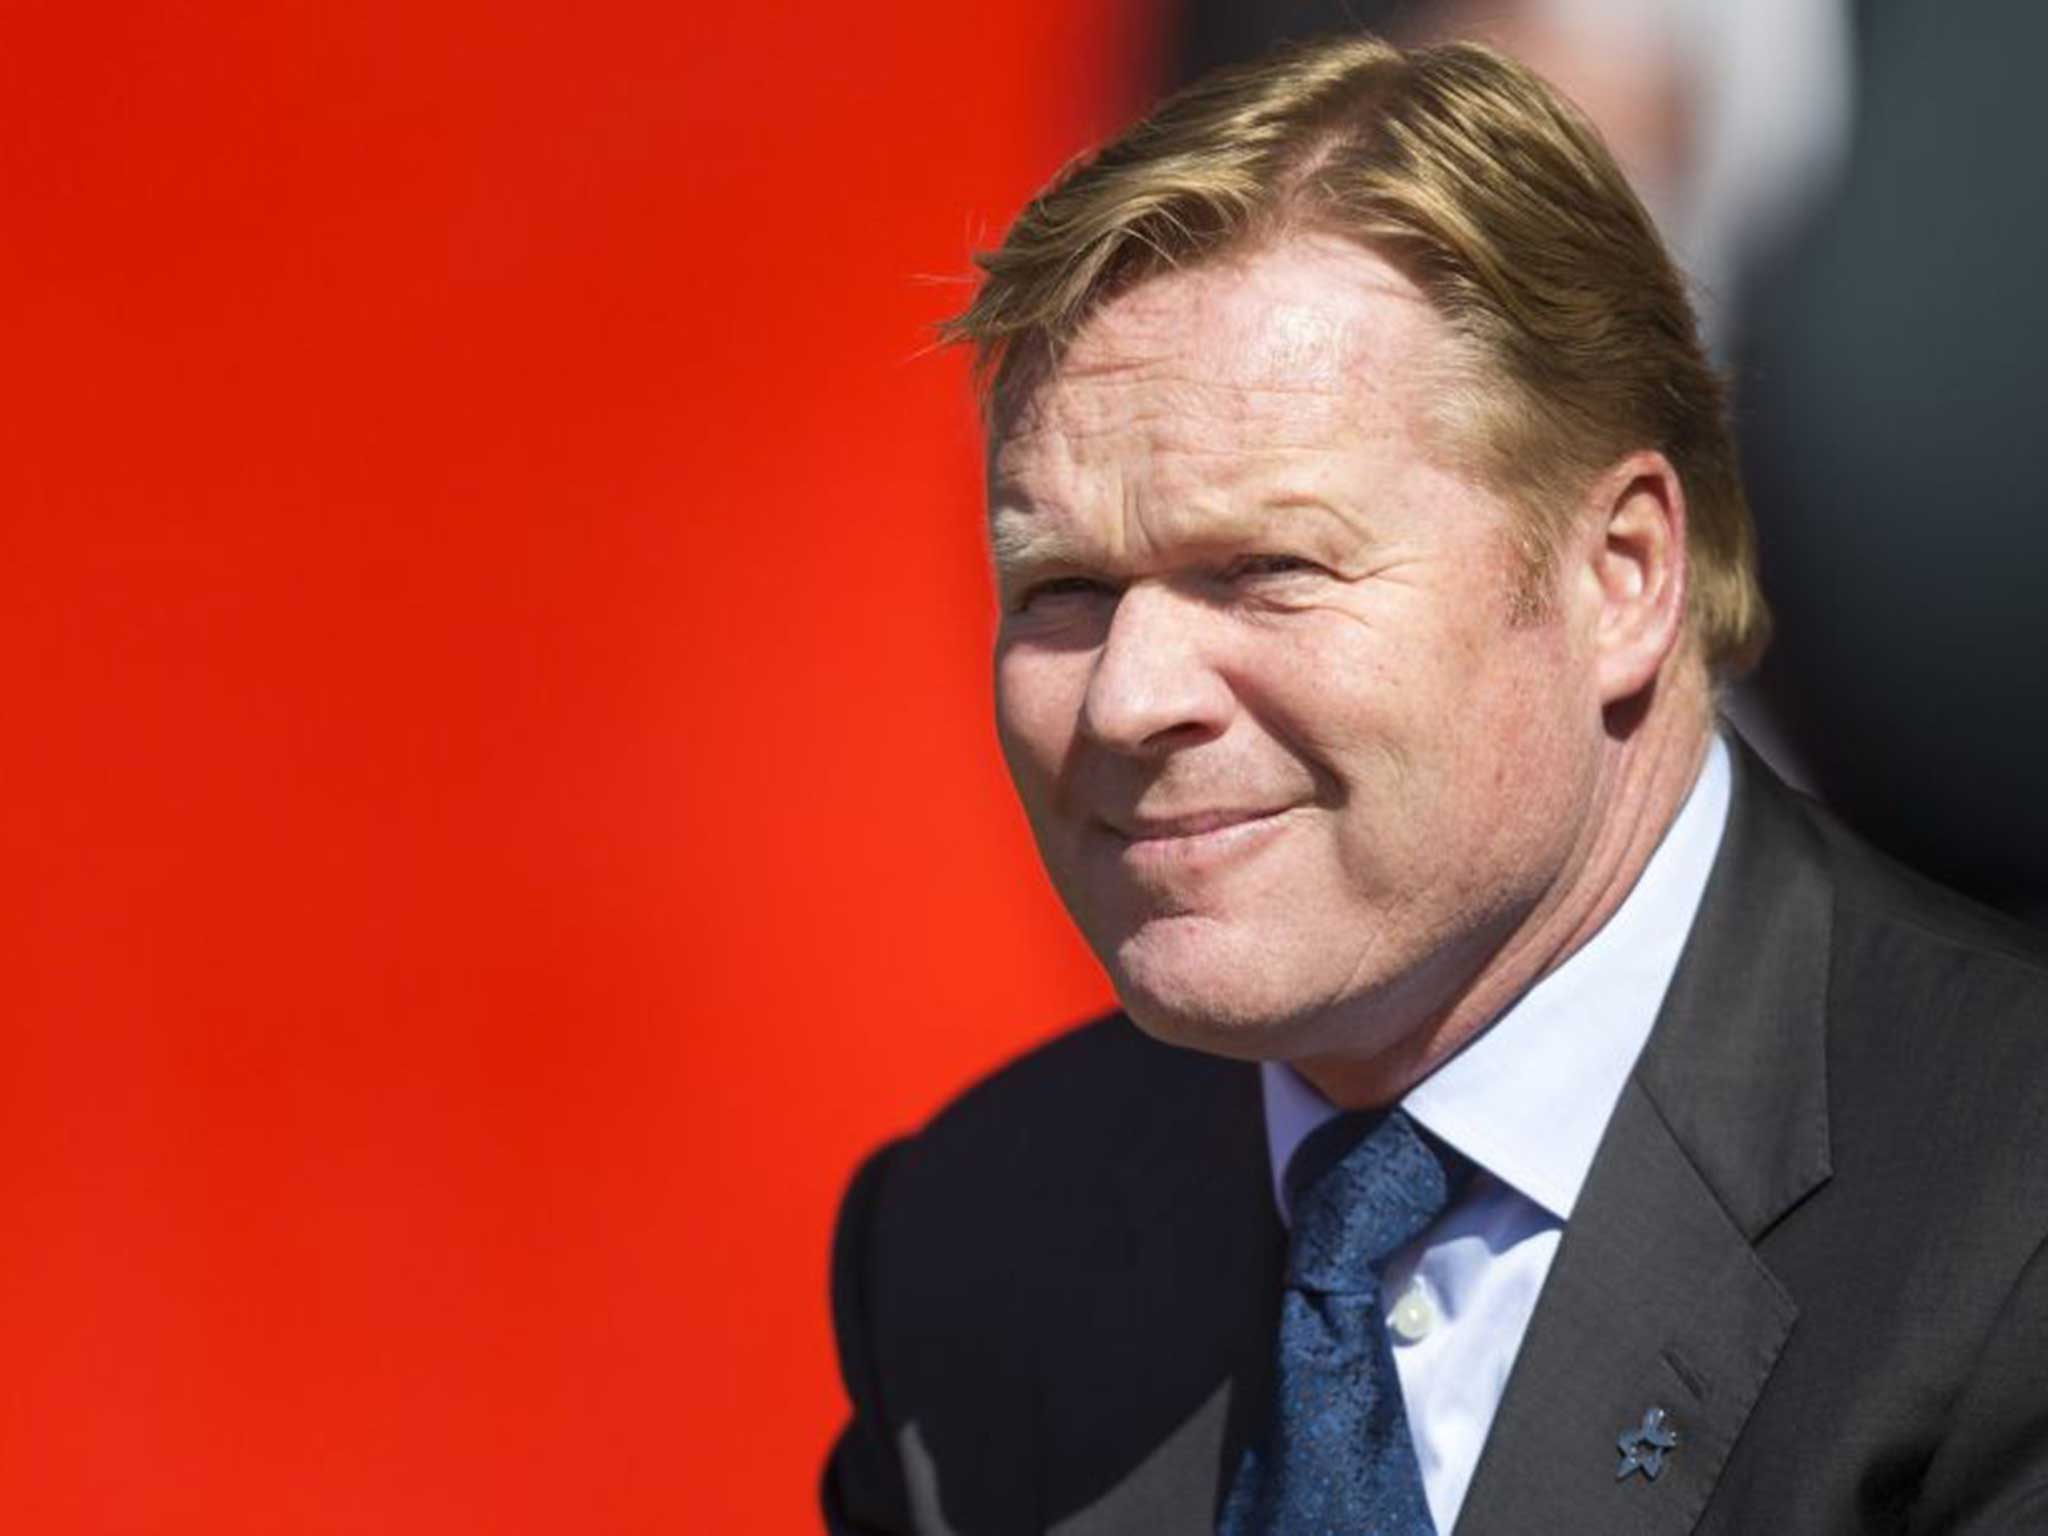 Koeman twice won the competition as a player and fully understands Clyne’s ambitions